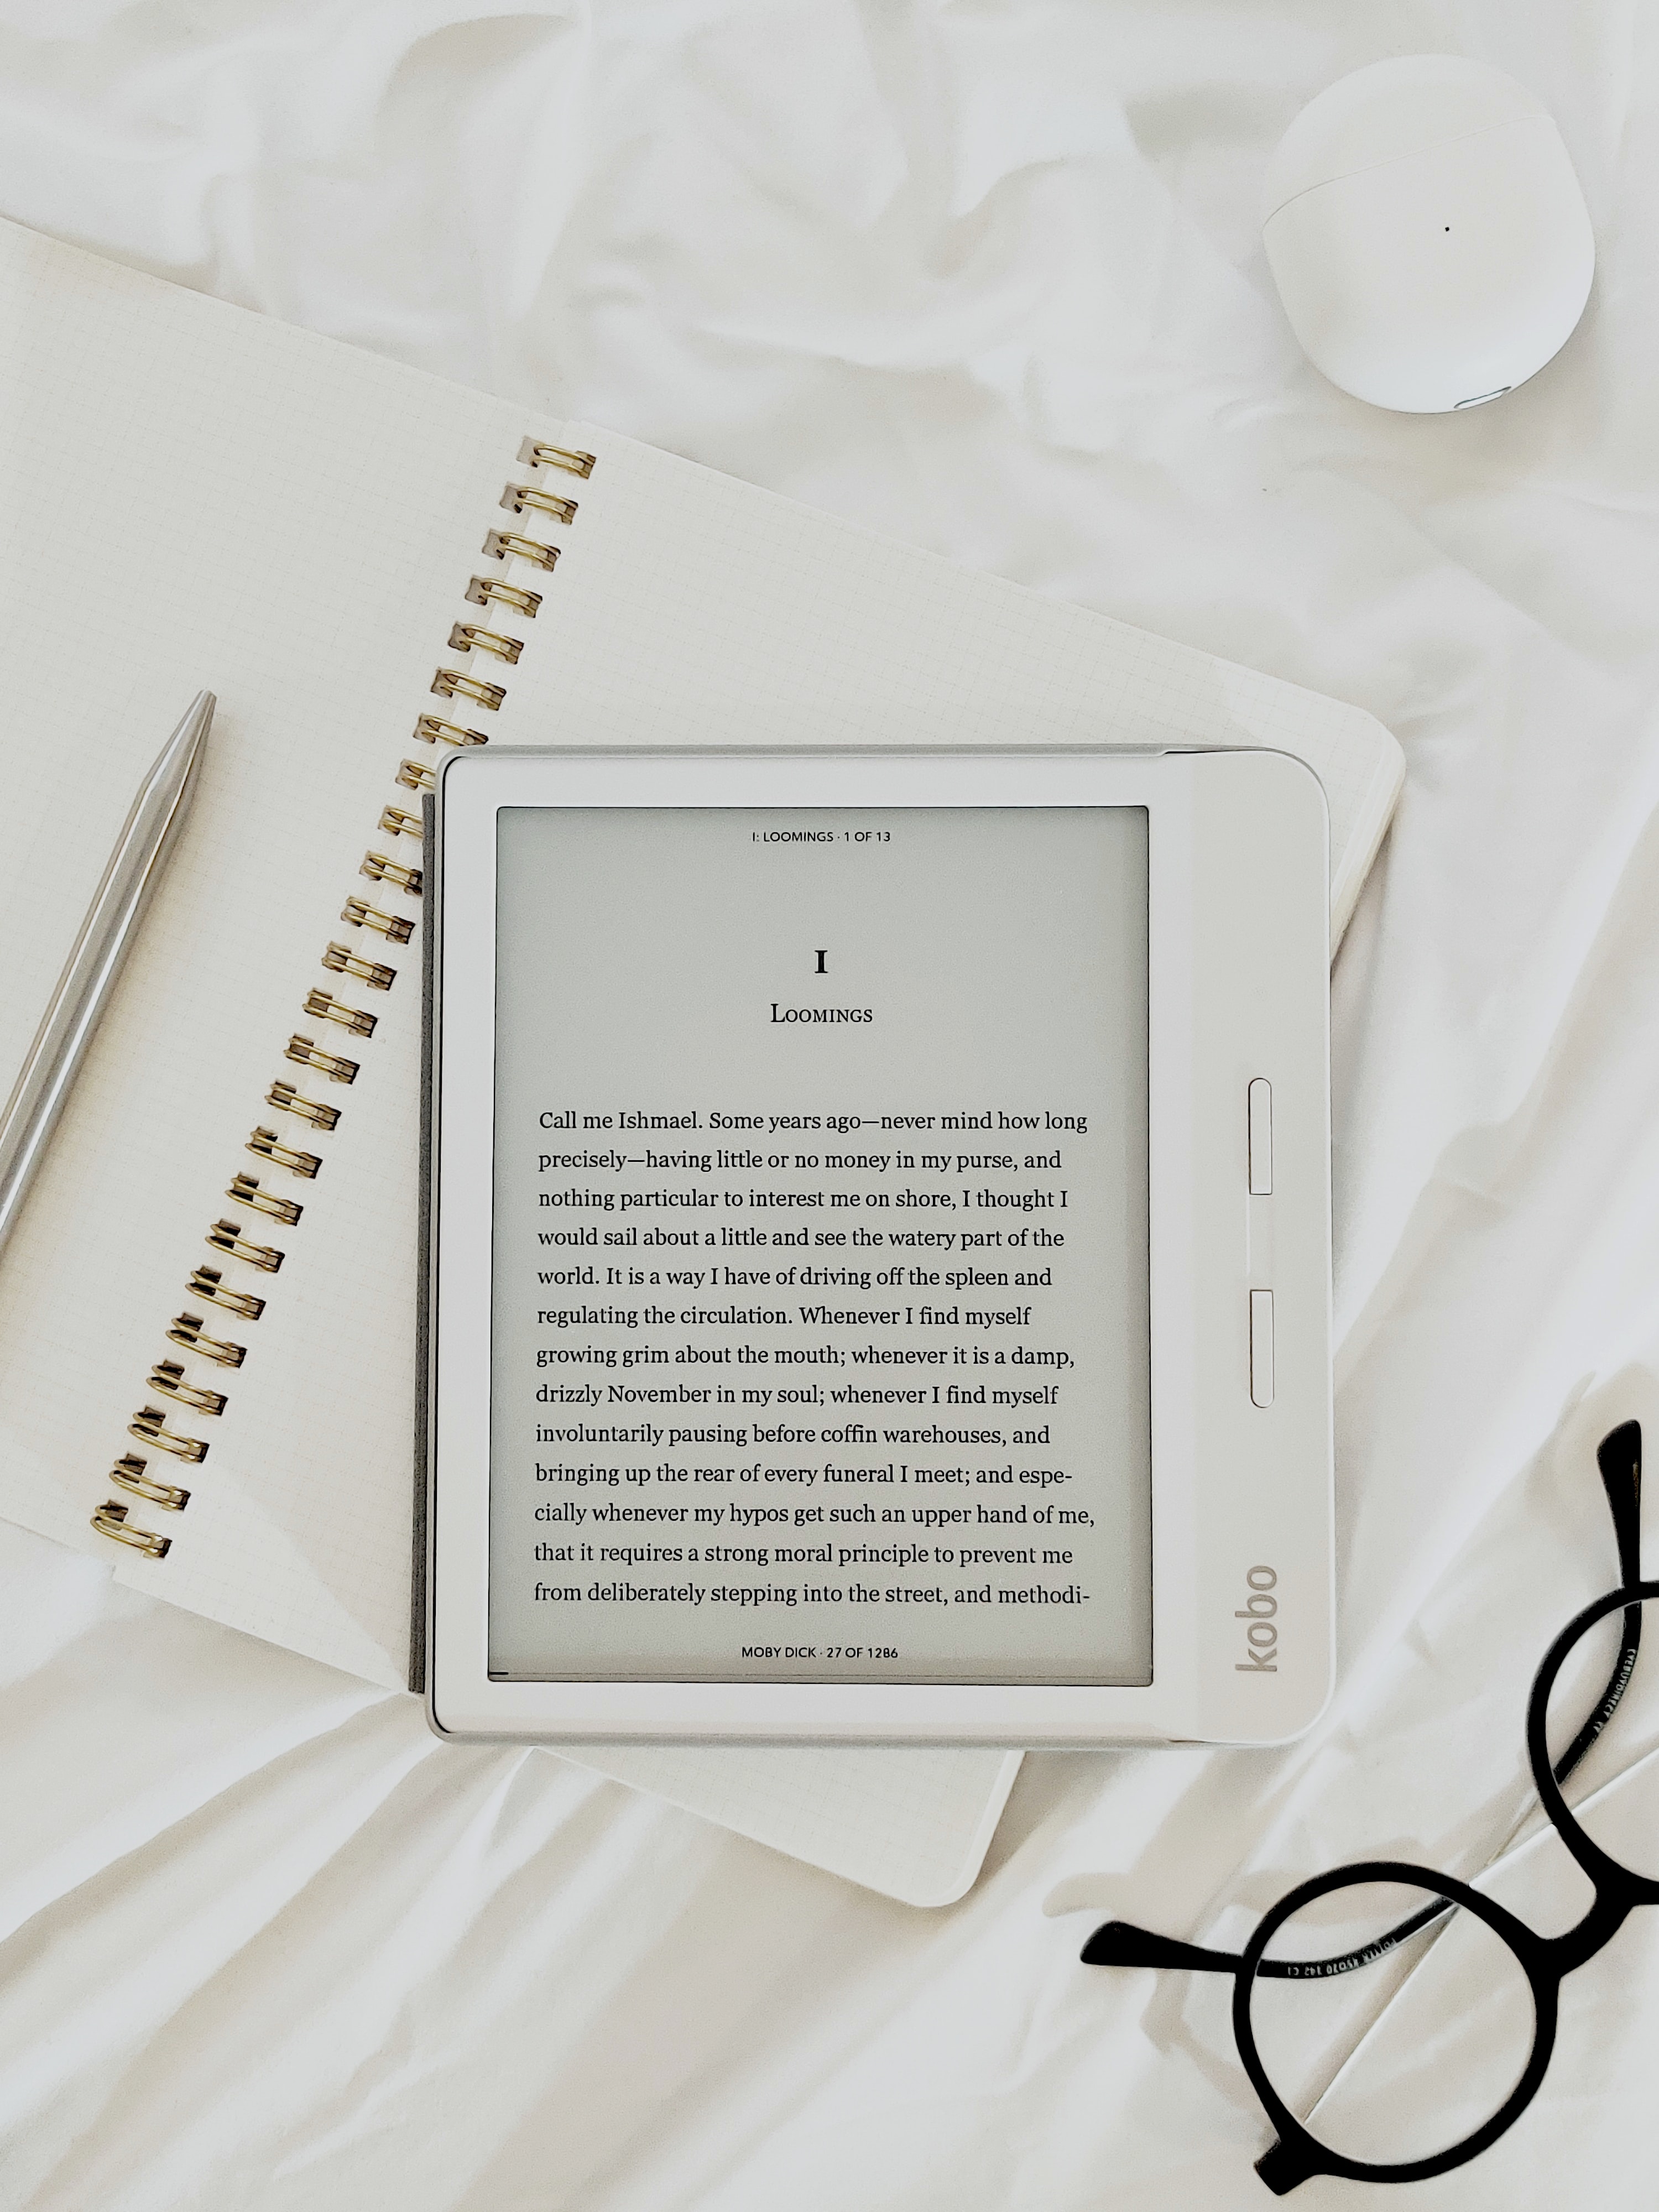 The benefit of the Ebook